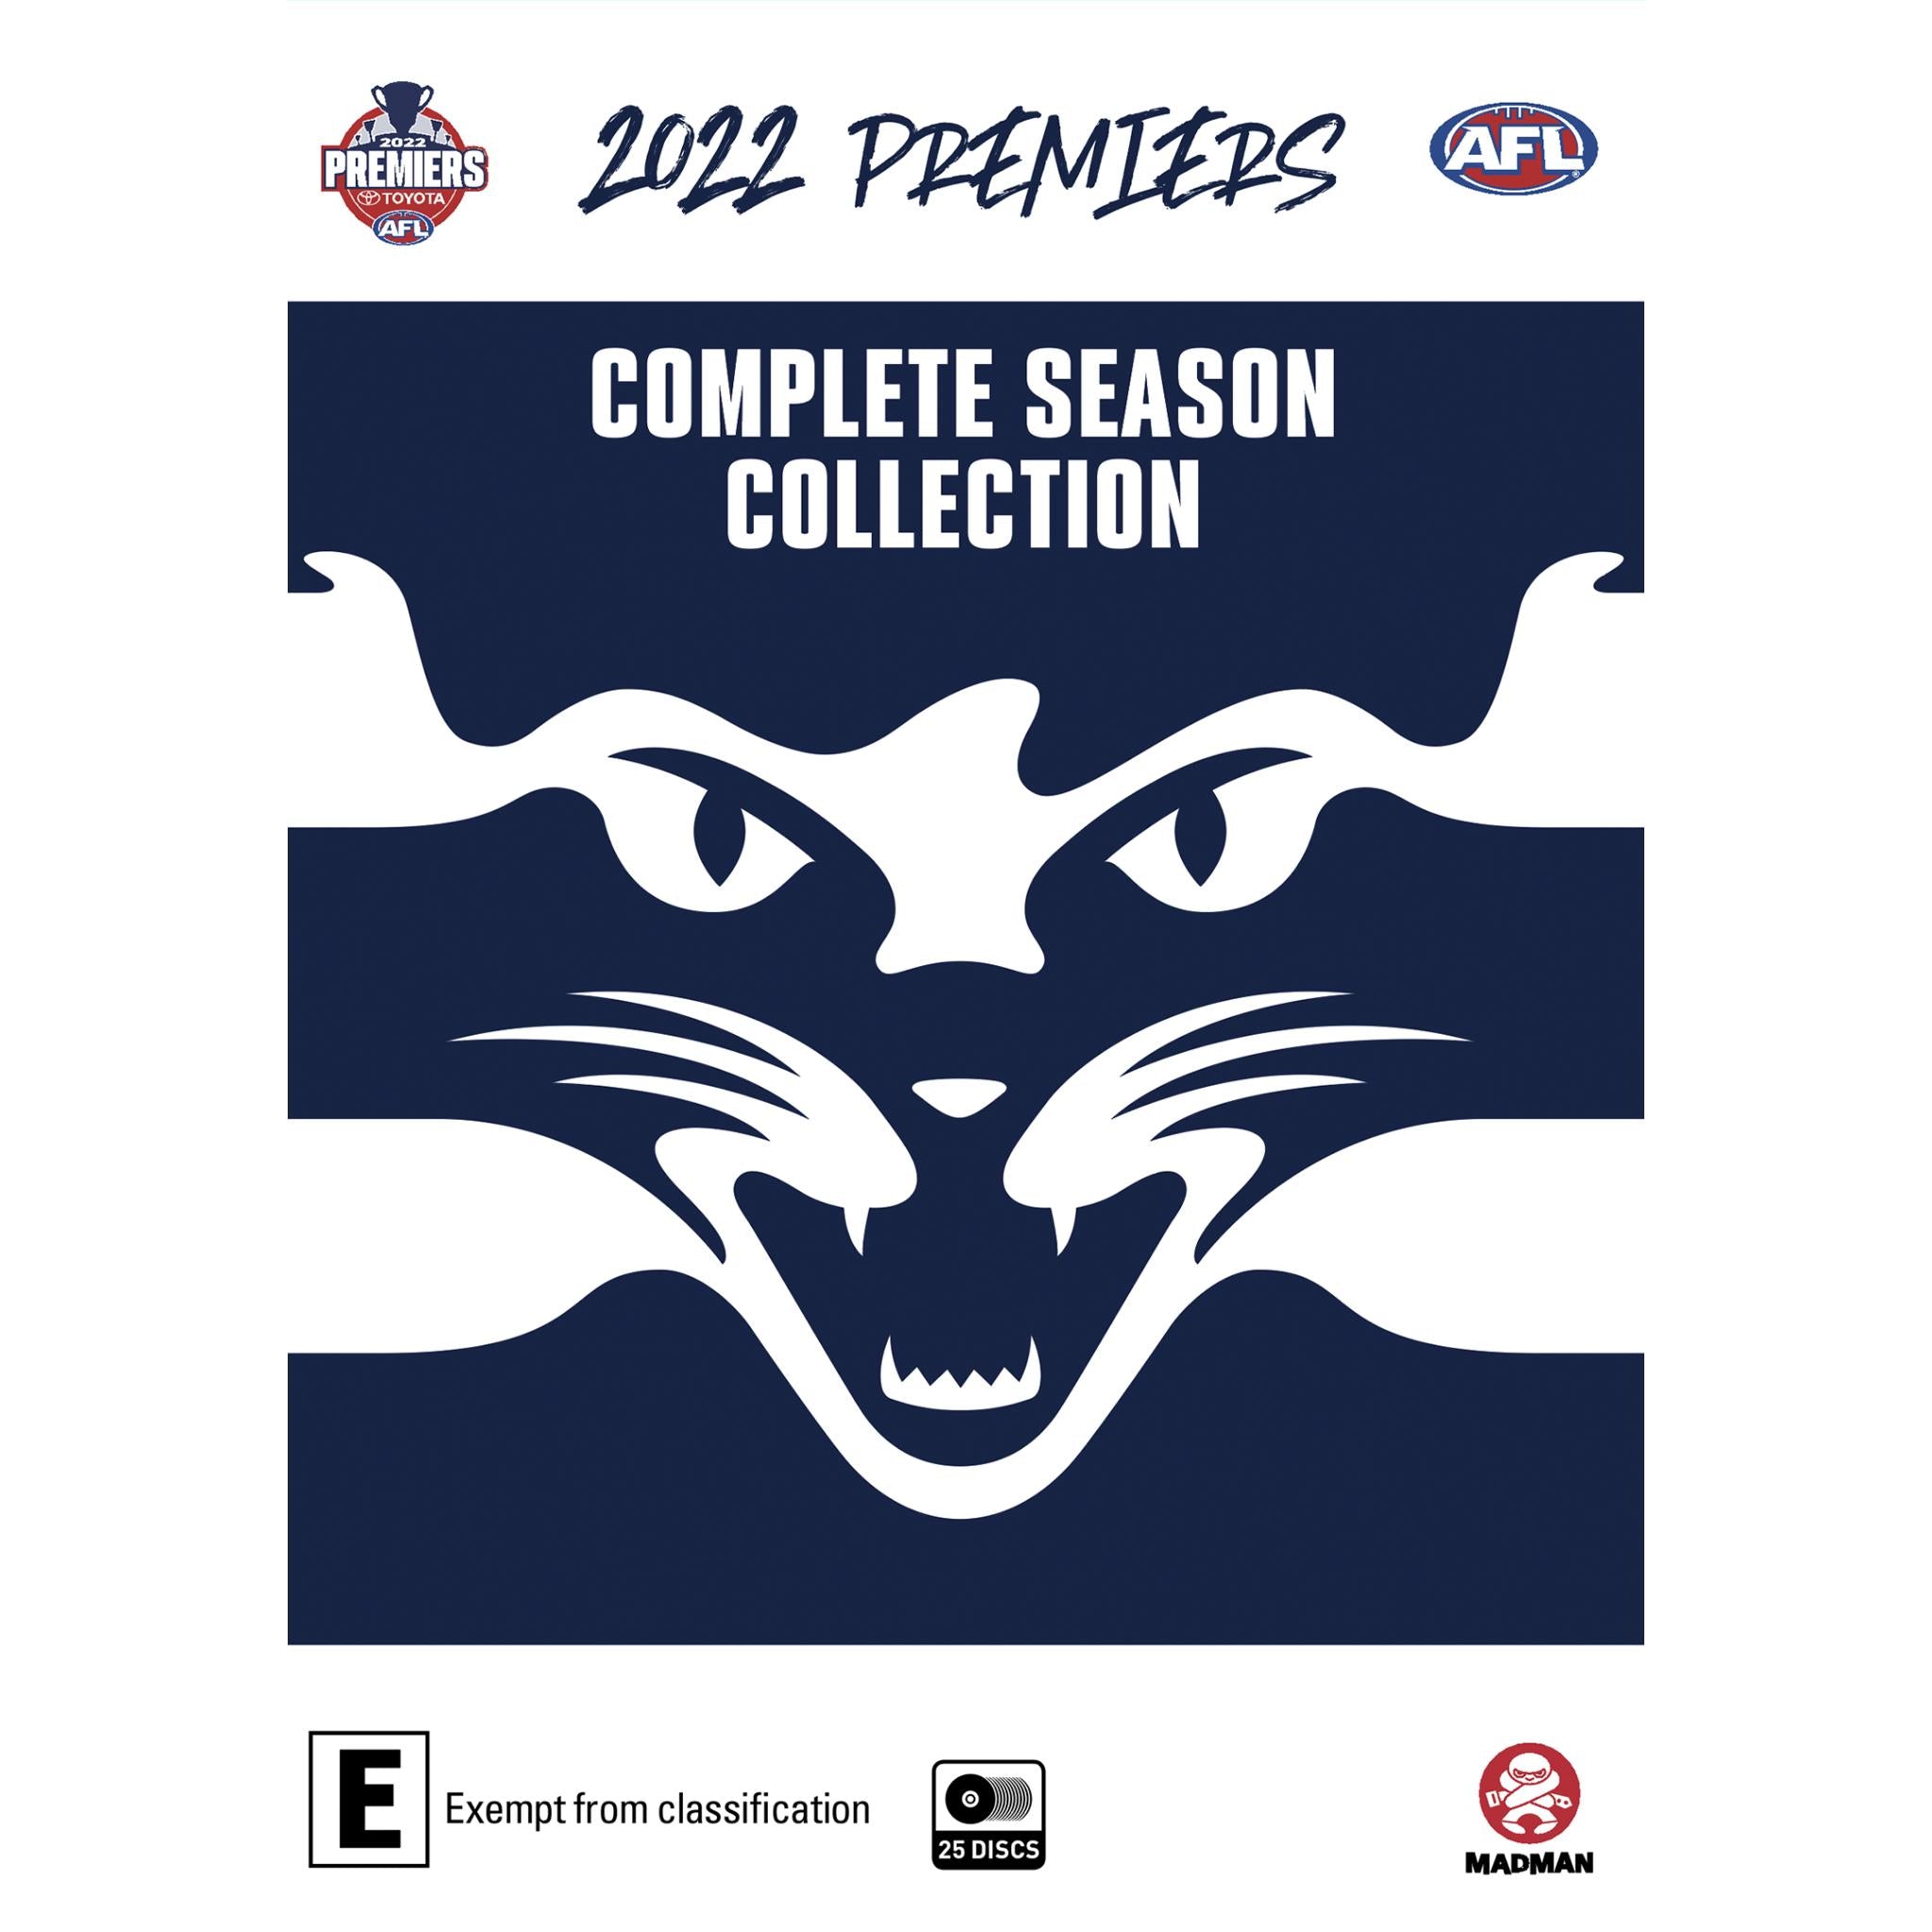 afl - premiers 2022 -geelong cats season collection